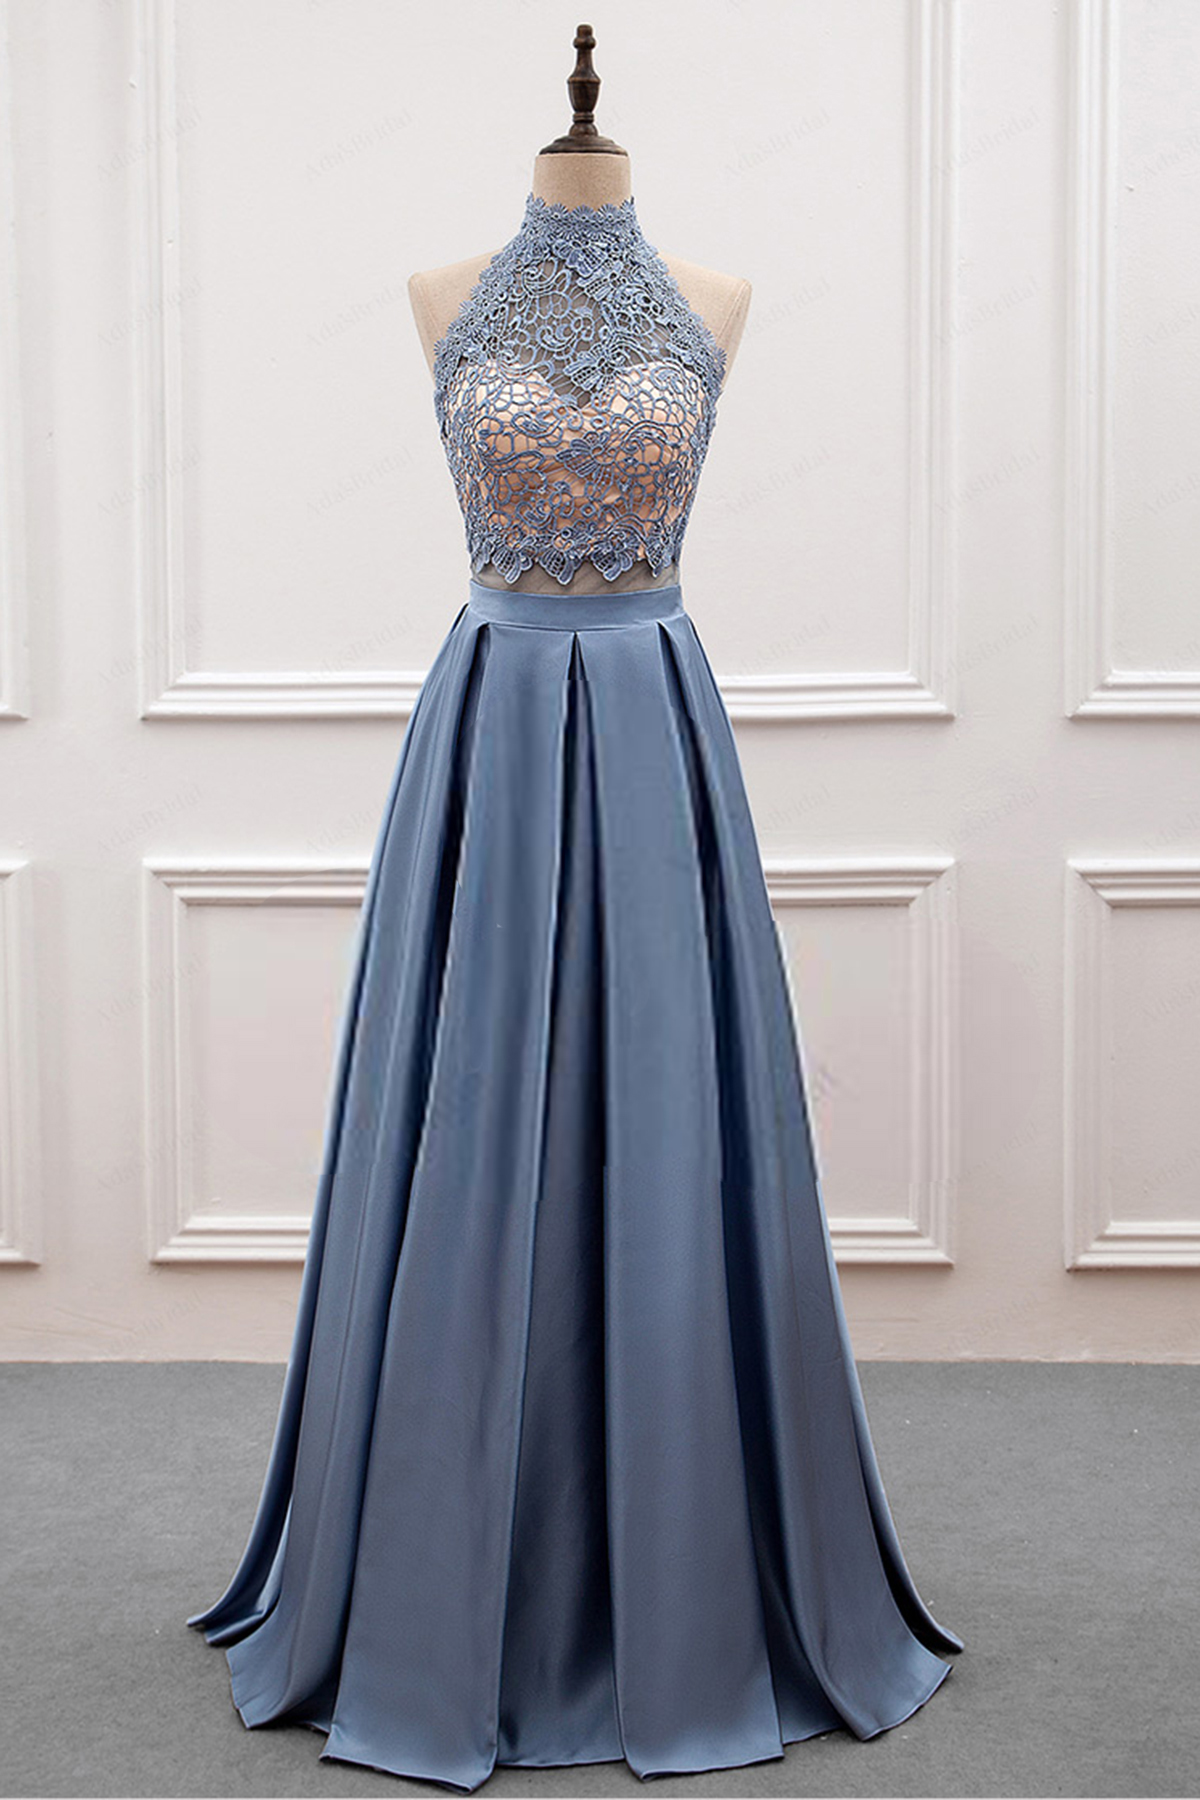 Two Pieces Prom Dresses,lace Prom Dress,long Prom Dresses,high Neck Prom Dresses,formal Evening Dress,a Line Evening Dresses,blue Prom